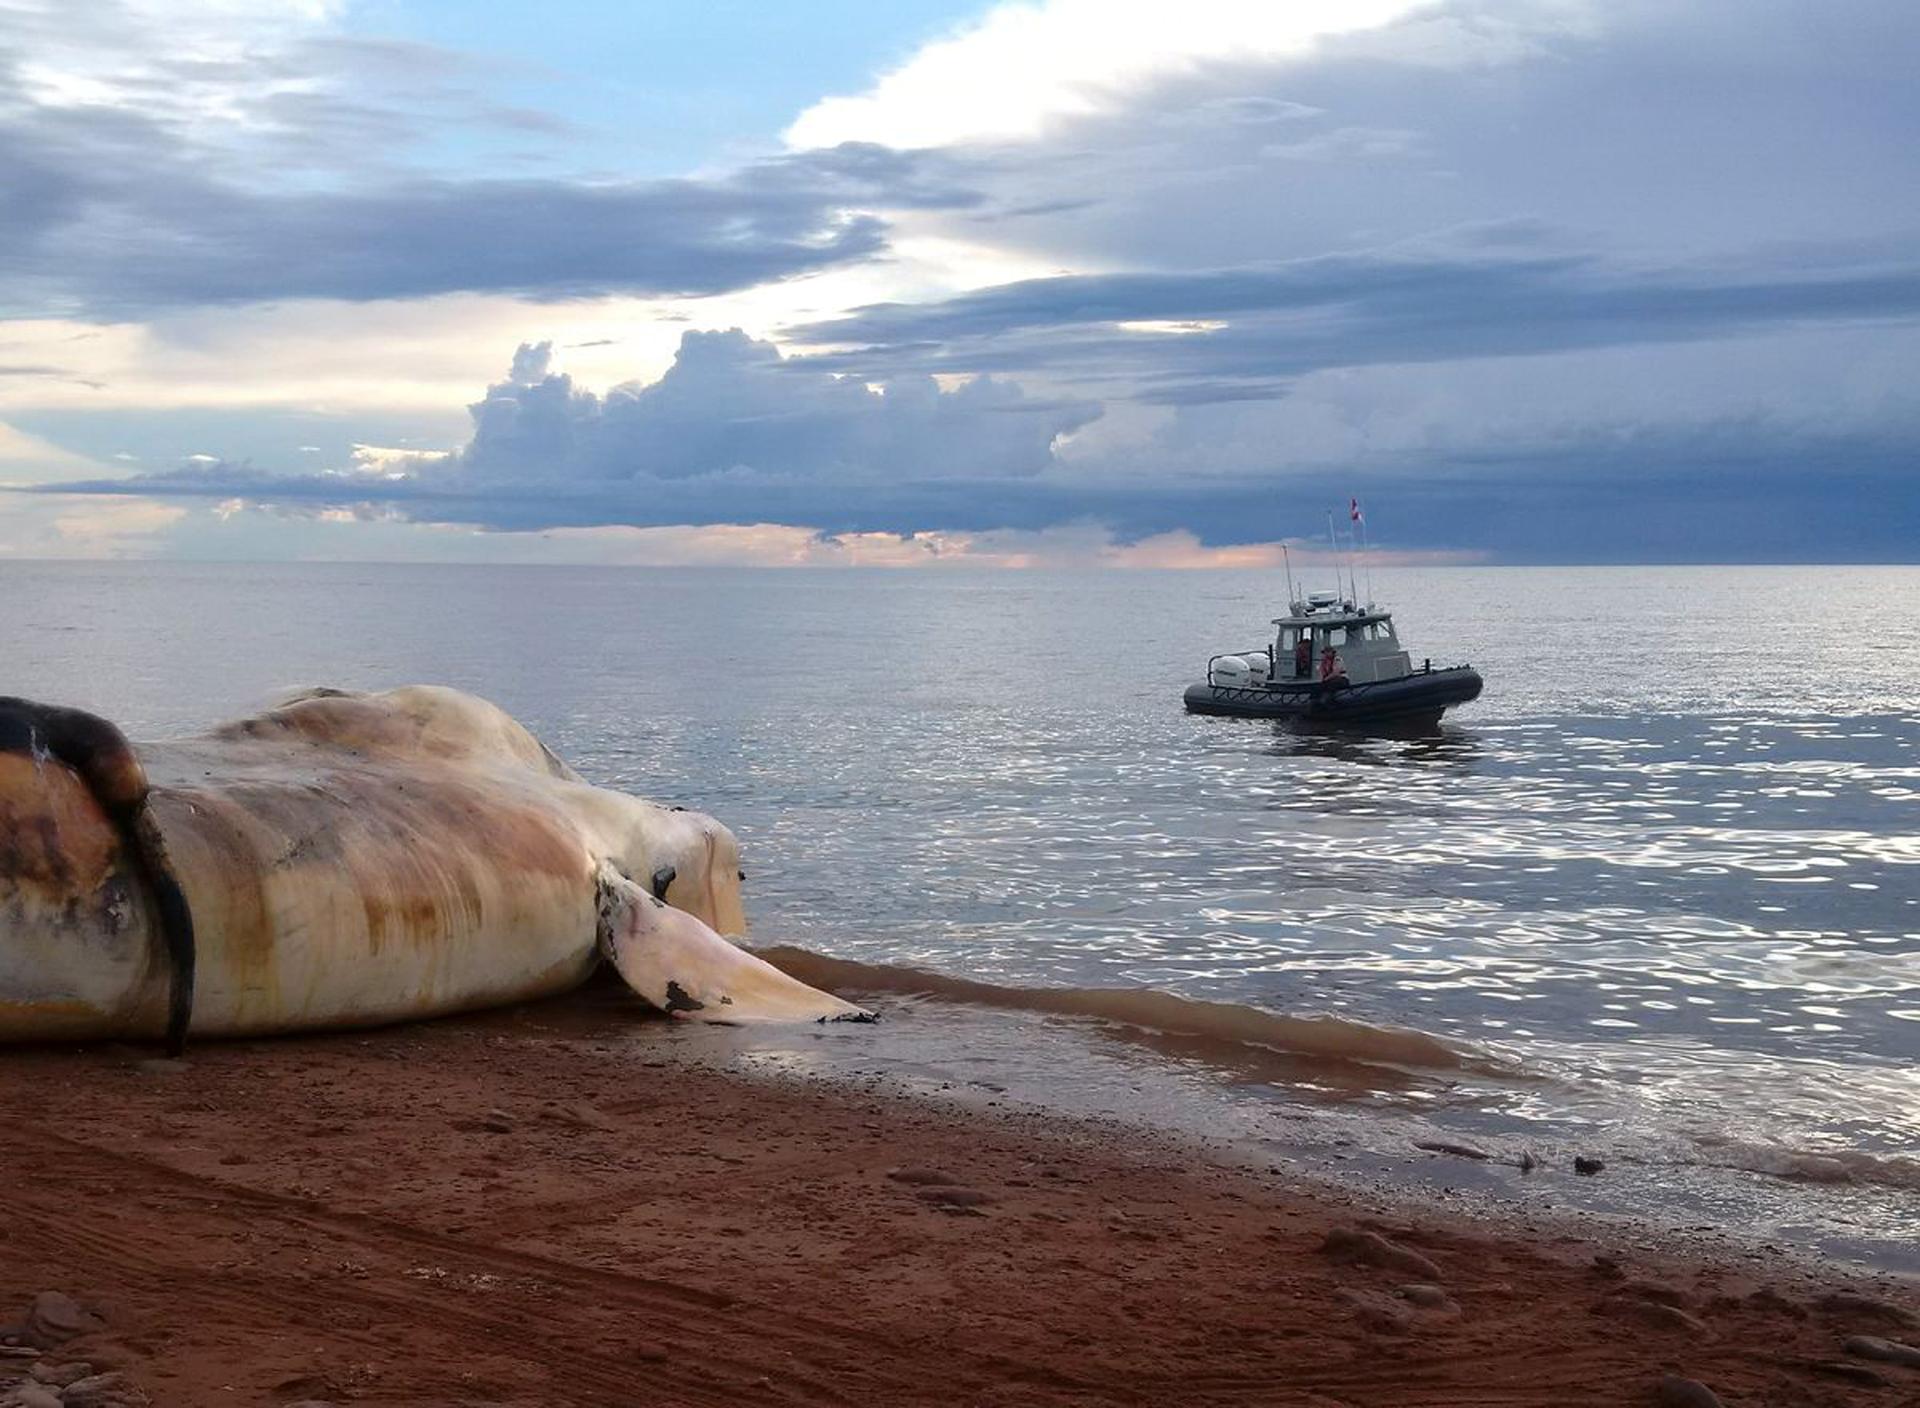 The carcass of a right whale is prepared to be towed out to sea near Norway, Prince Edward Island.